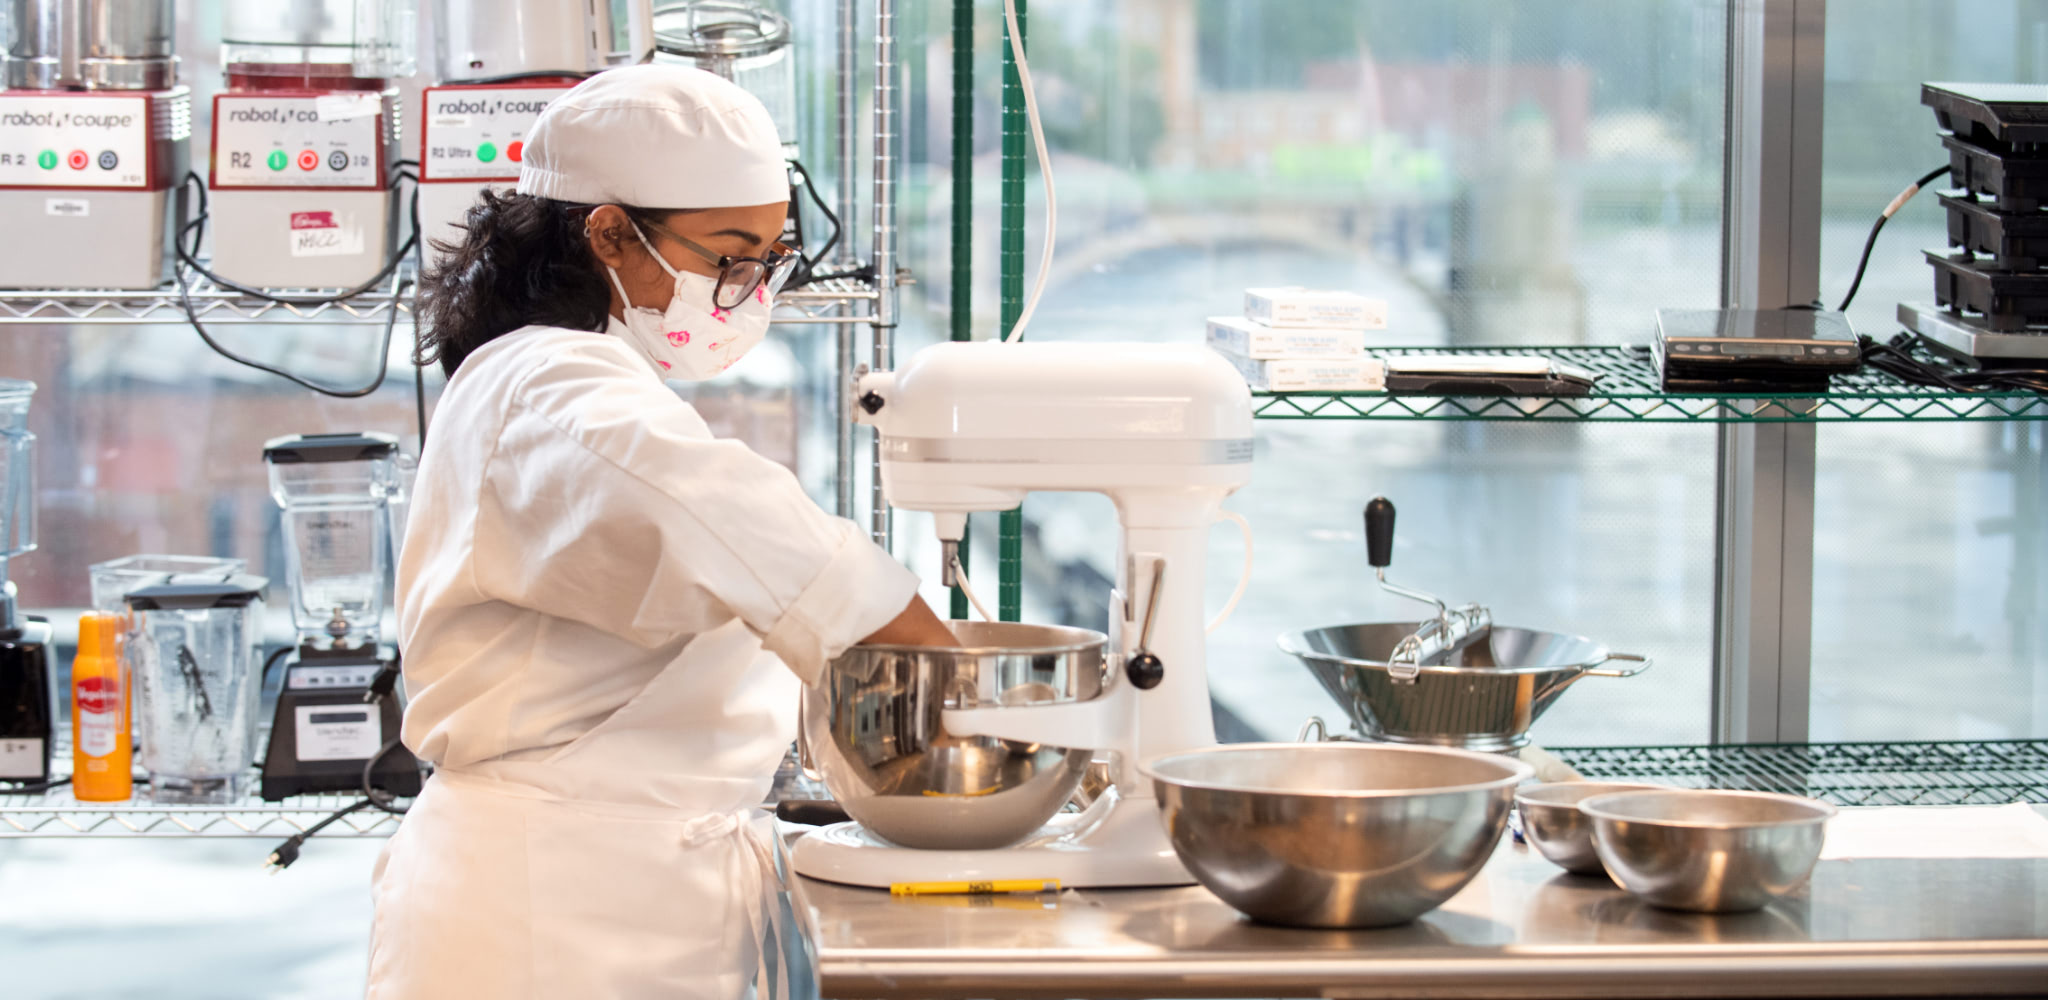 A Culinary Arts Certificate student uses a standing mixer while preparing a meal in class.